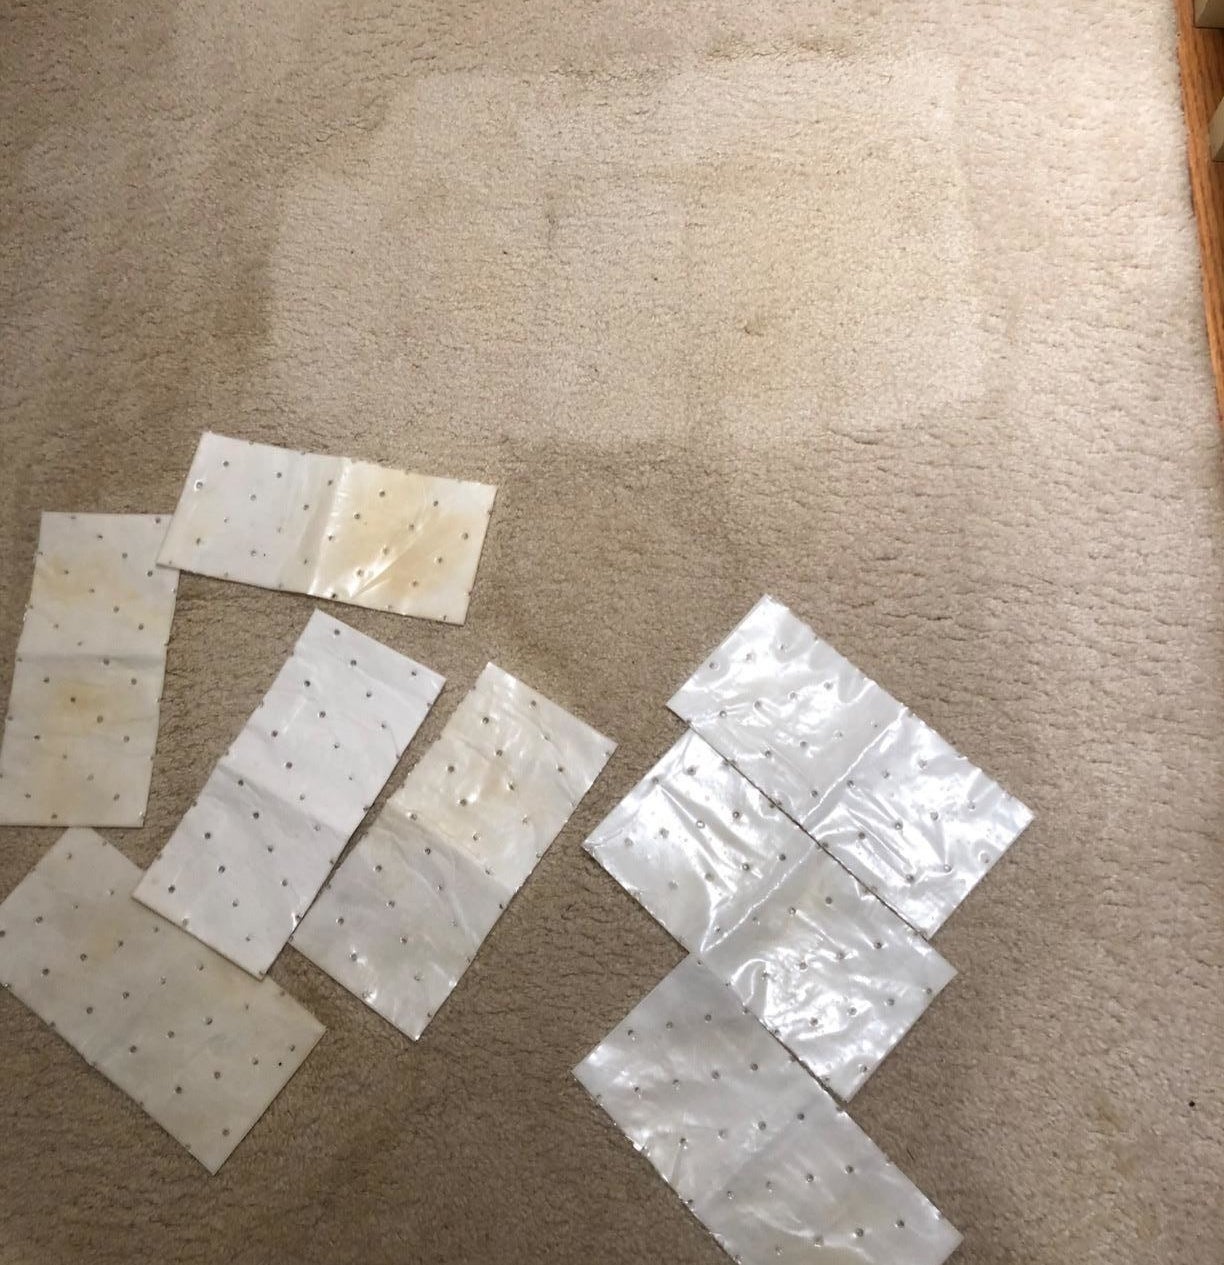 reviewer photo showing cleaning pads on their carpet and visibly cleaner spots where the pads have already been applied 